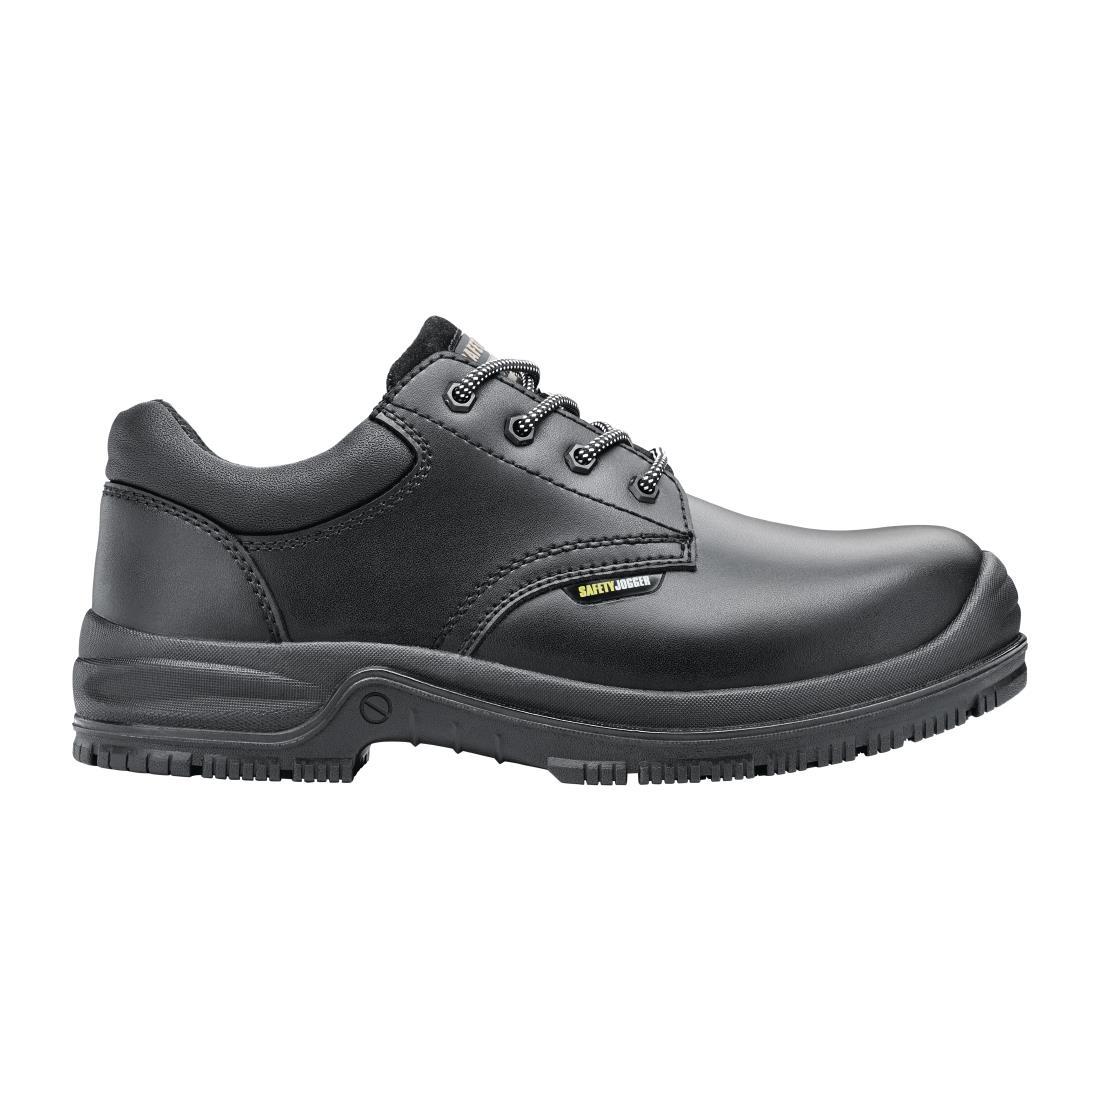 Shoes for Crews X111081 Safety Shoe Black Size 37 - BB596-37  - 1